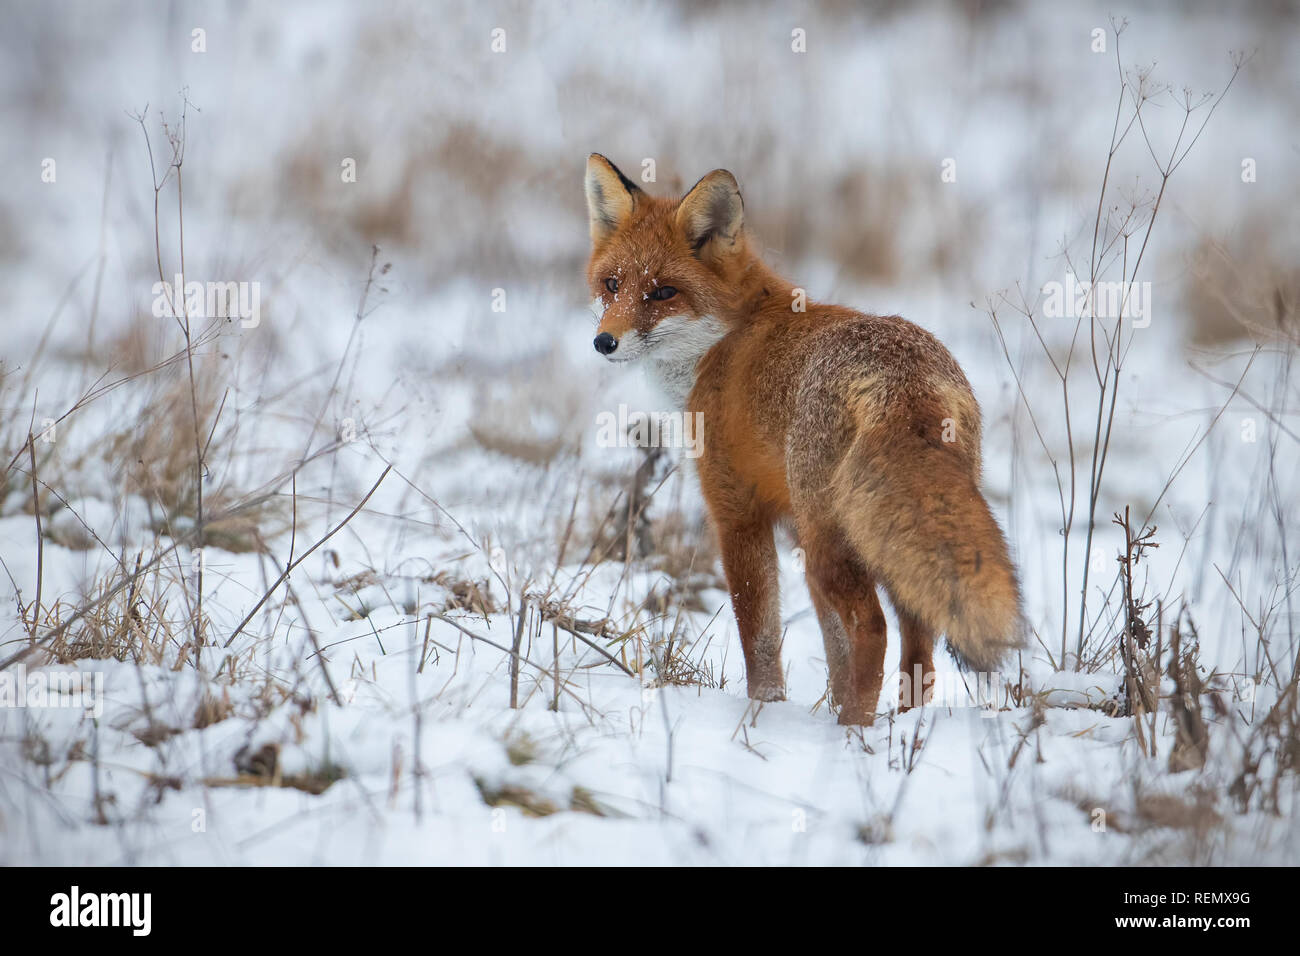 Red fox, vulpes vulpes, on snow in winter. Stock Photo